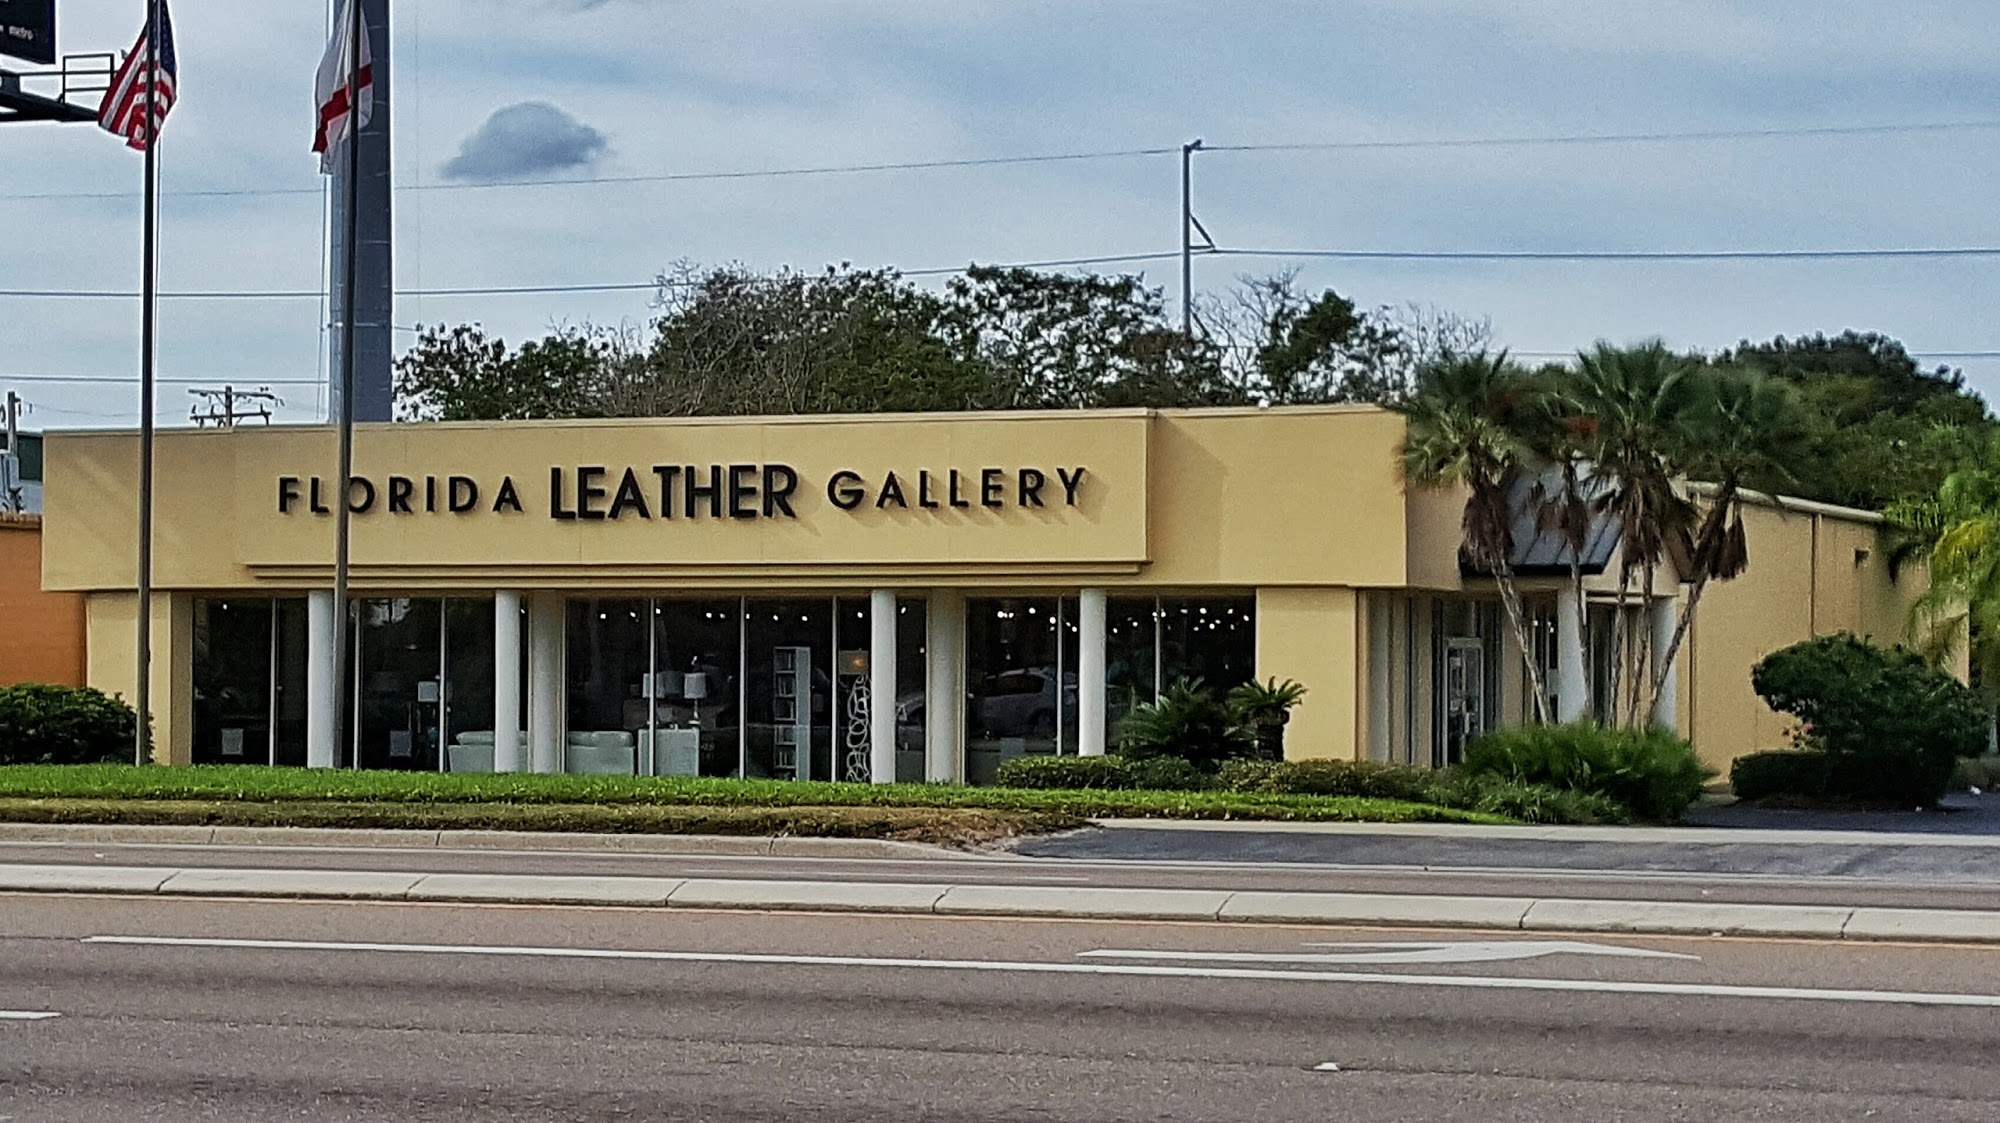 Florida Leather Gallery